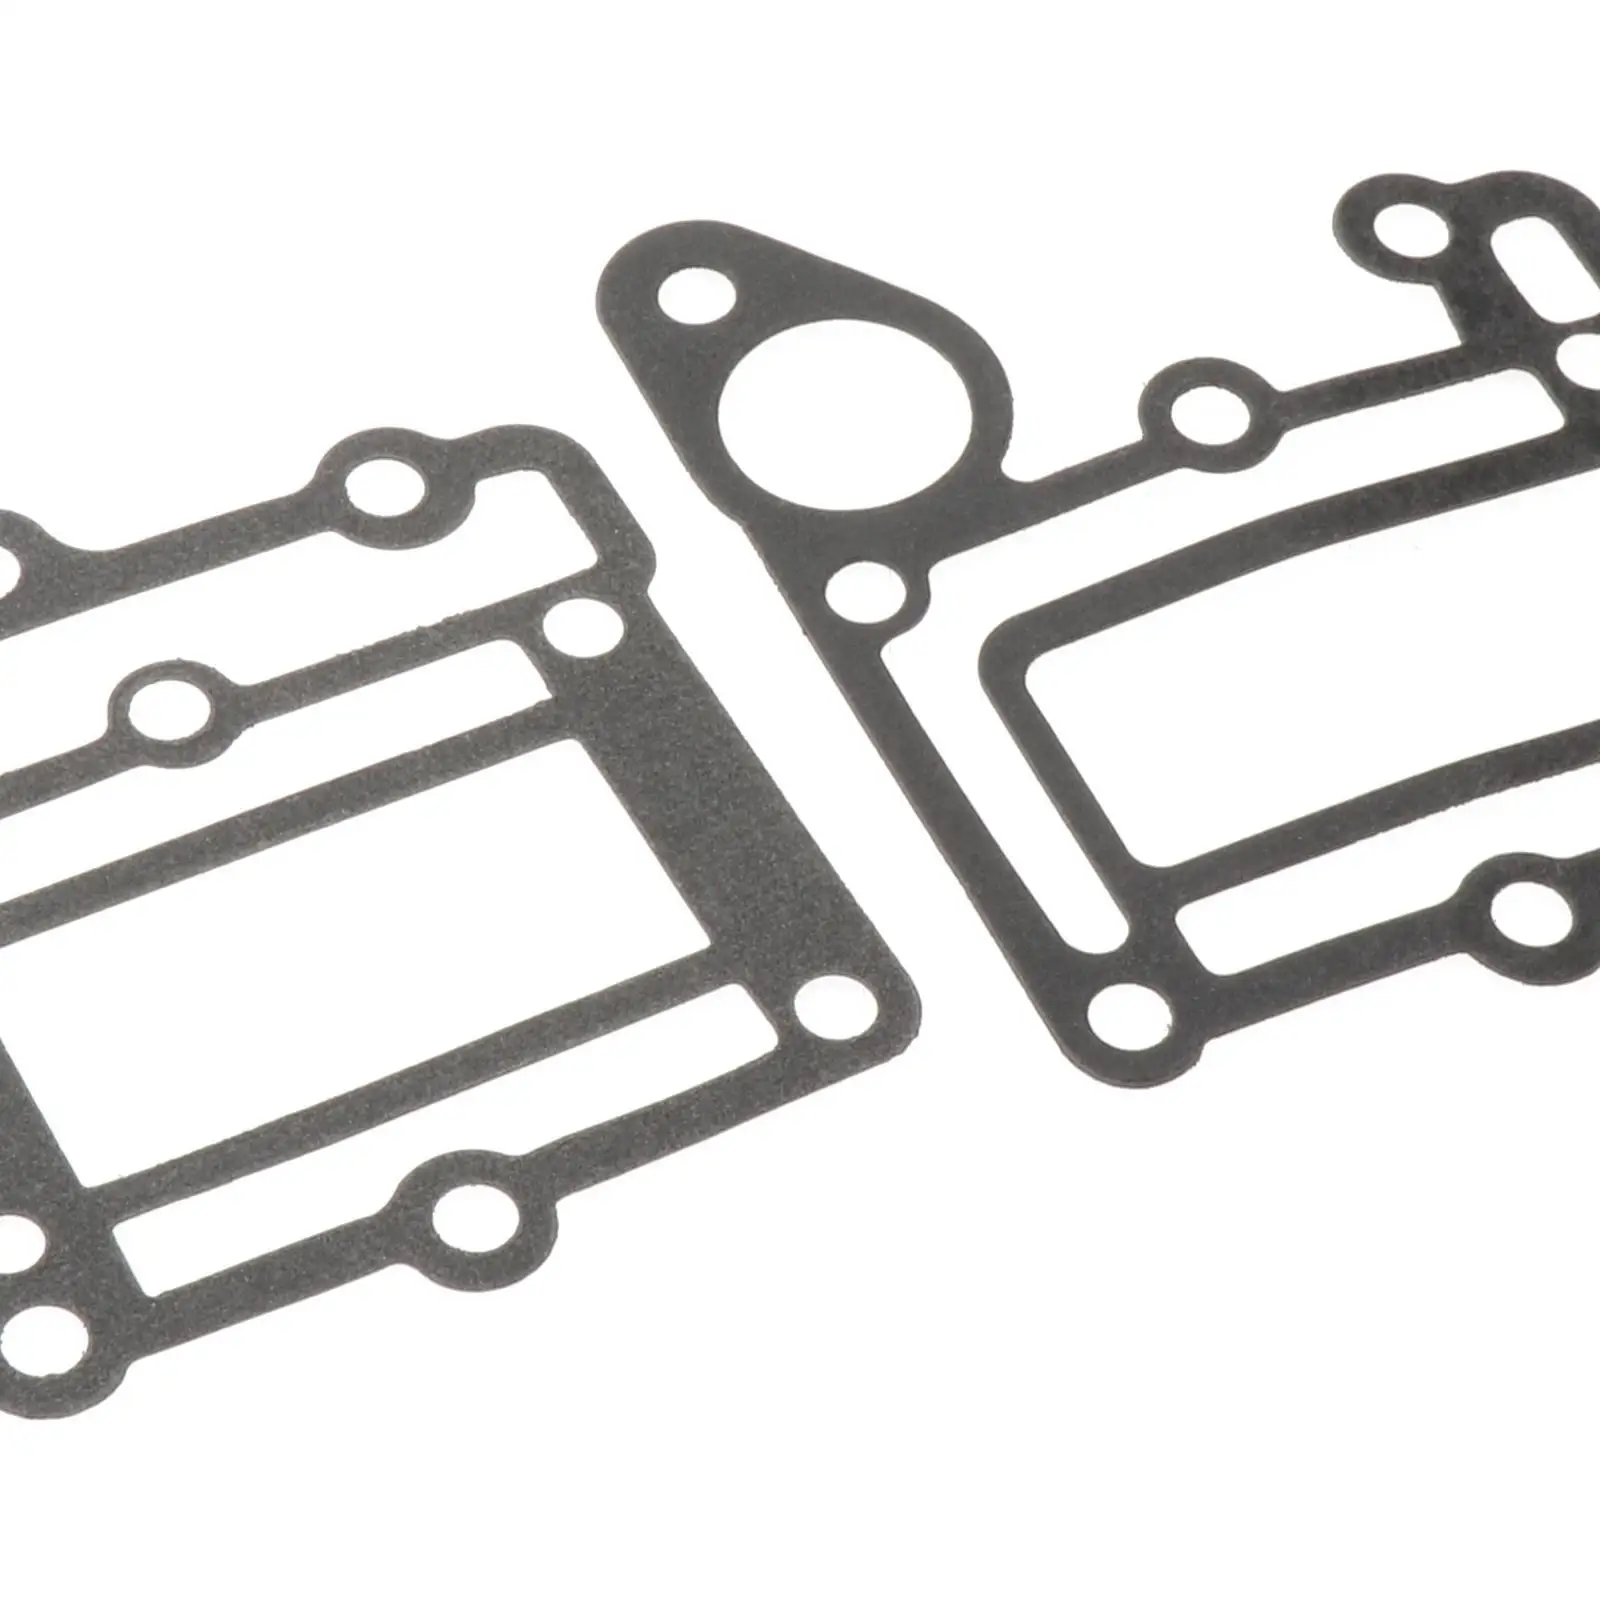 2x Exhaust Jacket Gasket Kit 6E0-41112-A0 6E0-41114-A0 Exhaust Inner Cover Gasket Fits for 2T 4HP 6E0 Model Outboard Motors